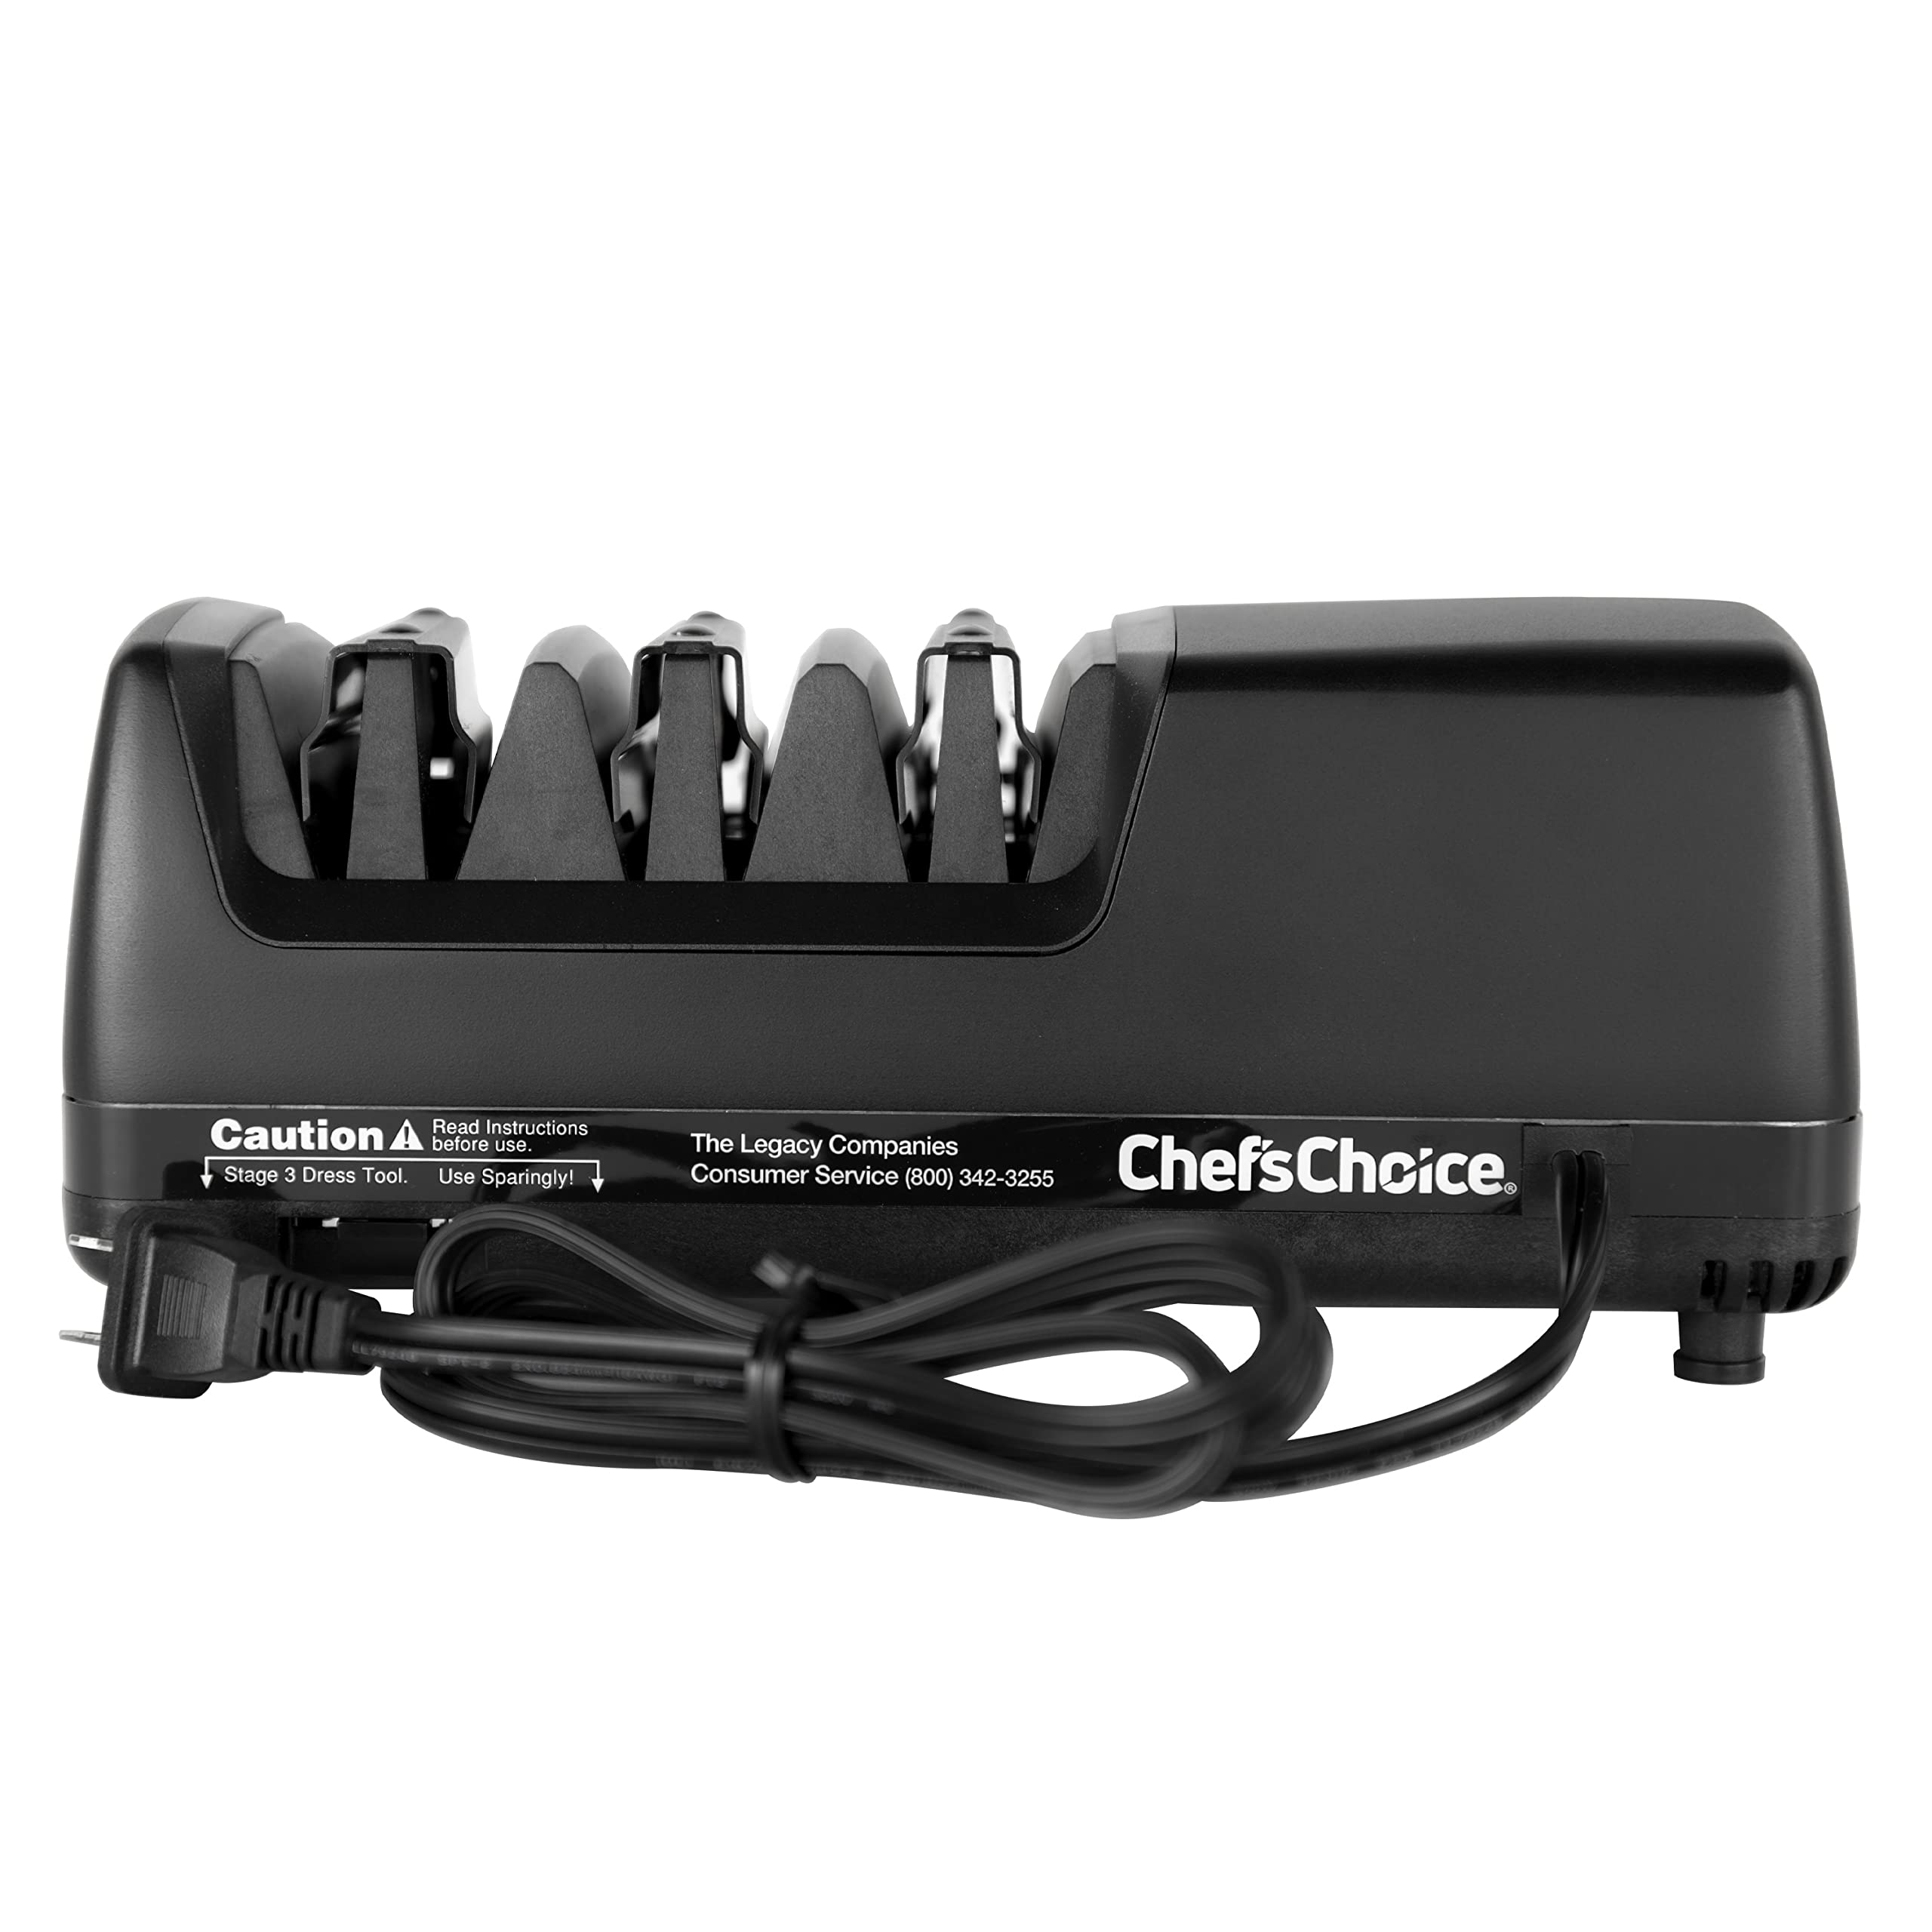 Chef’sChoice Trizor 15XV Professional Electric Knife Sharpener With 100-Percent Diamond Abrasives And Precision Angle Guides For Straight Edge and Serrated Knives, 3-Stage, Black